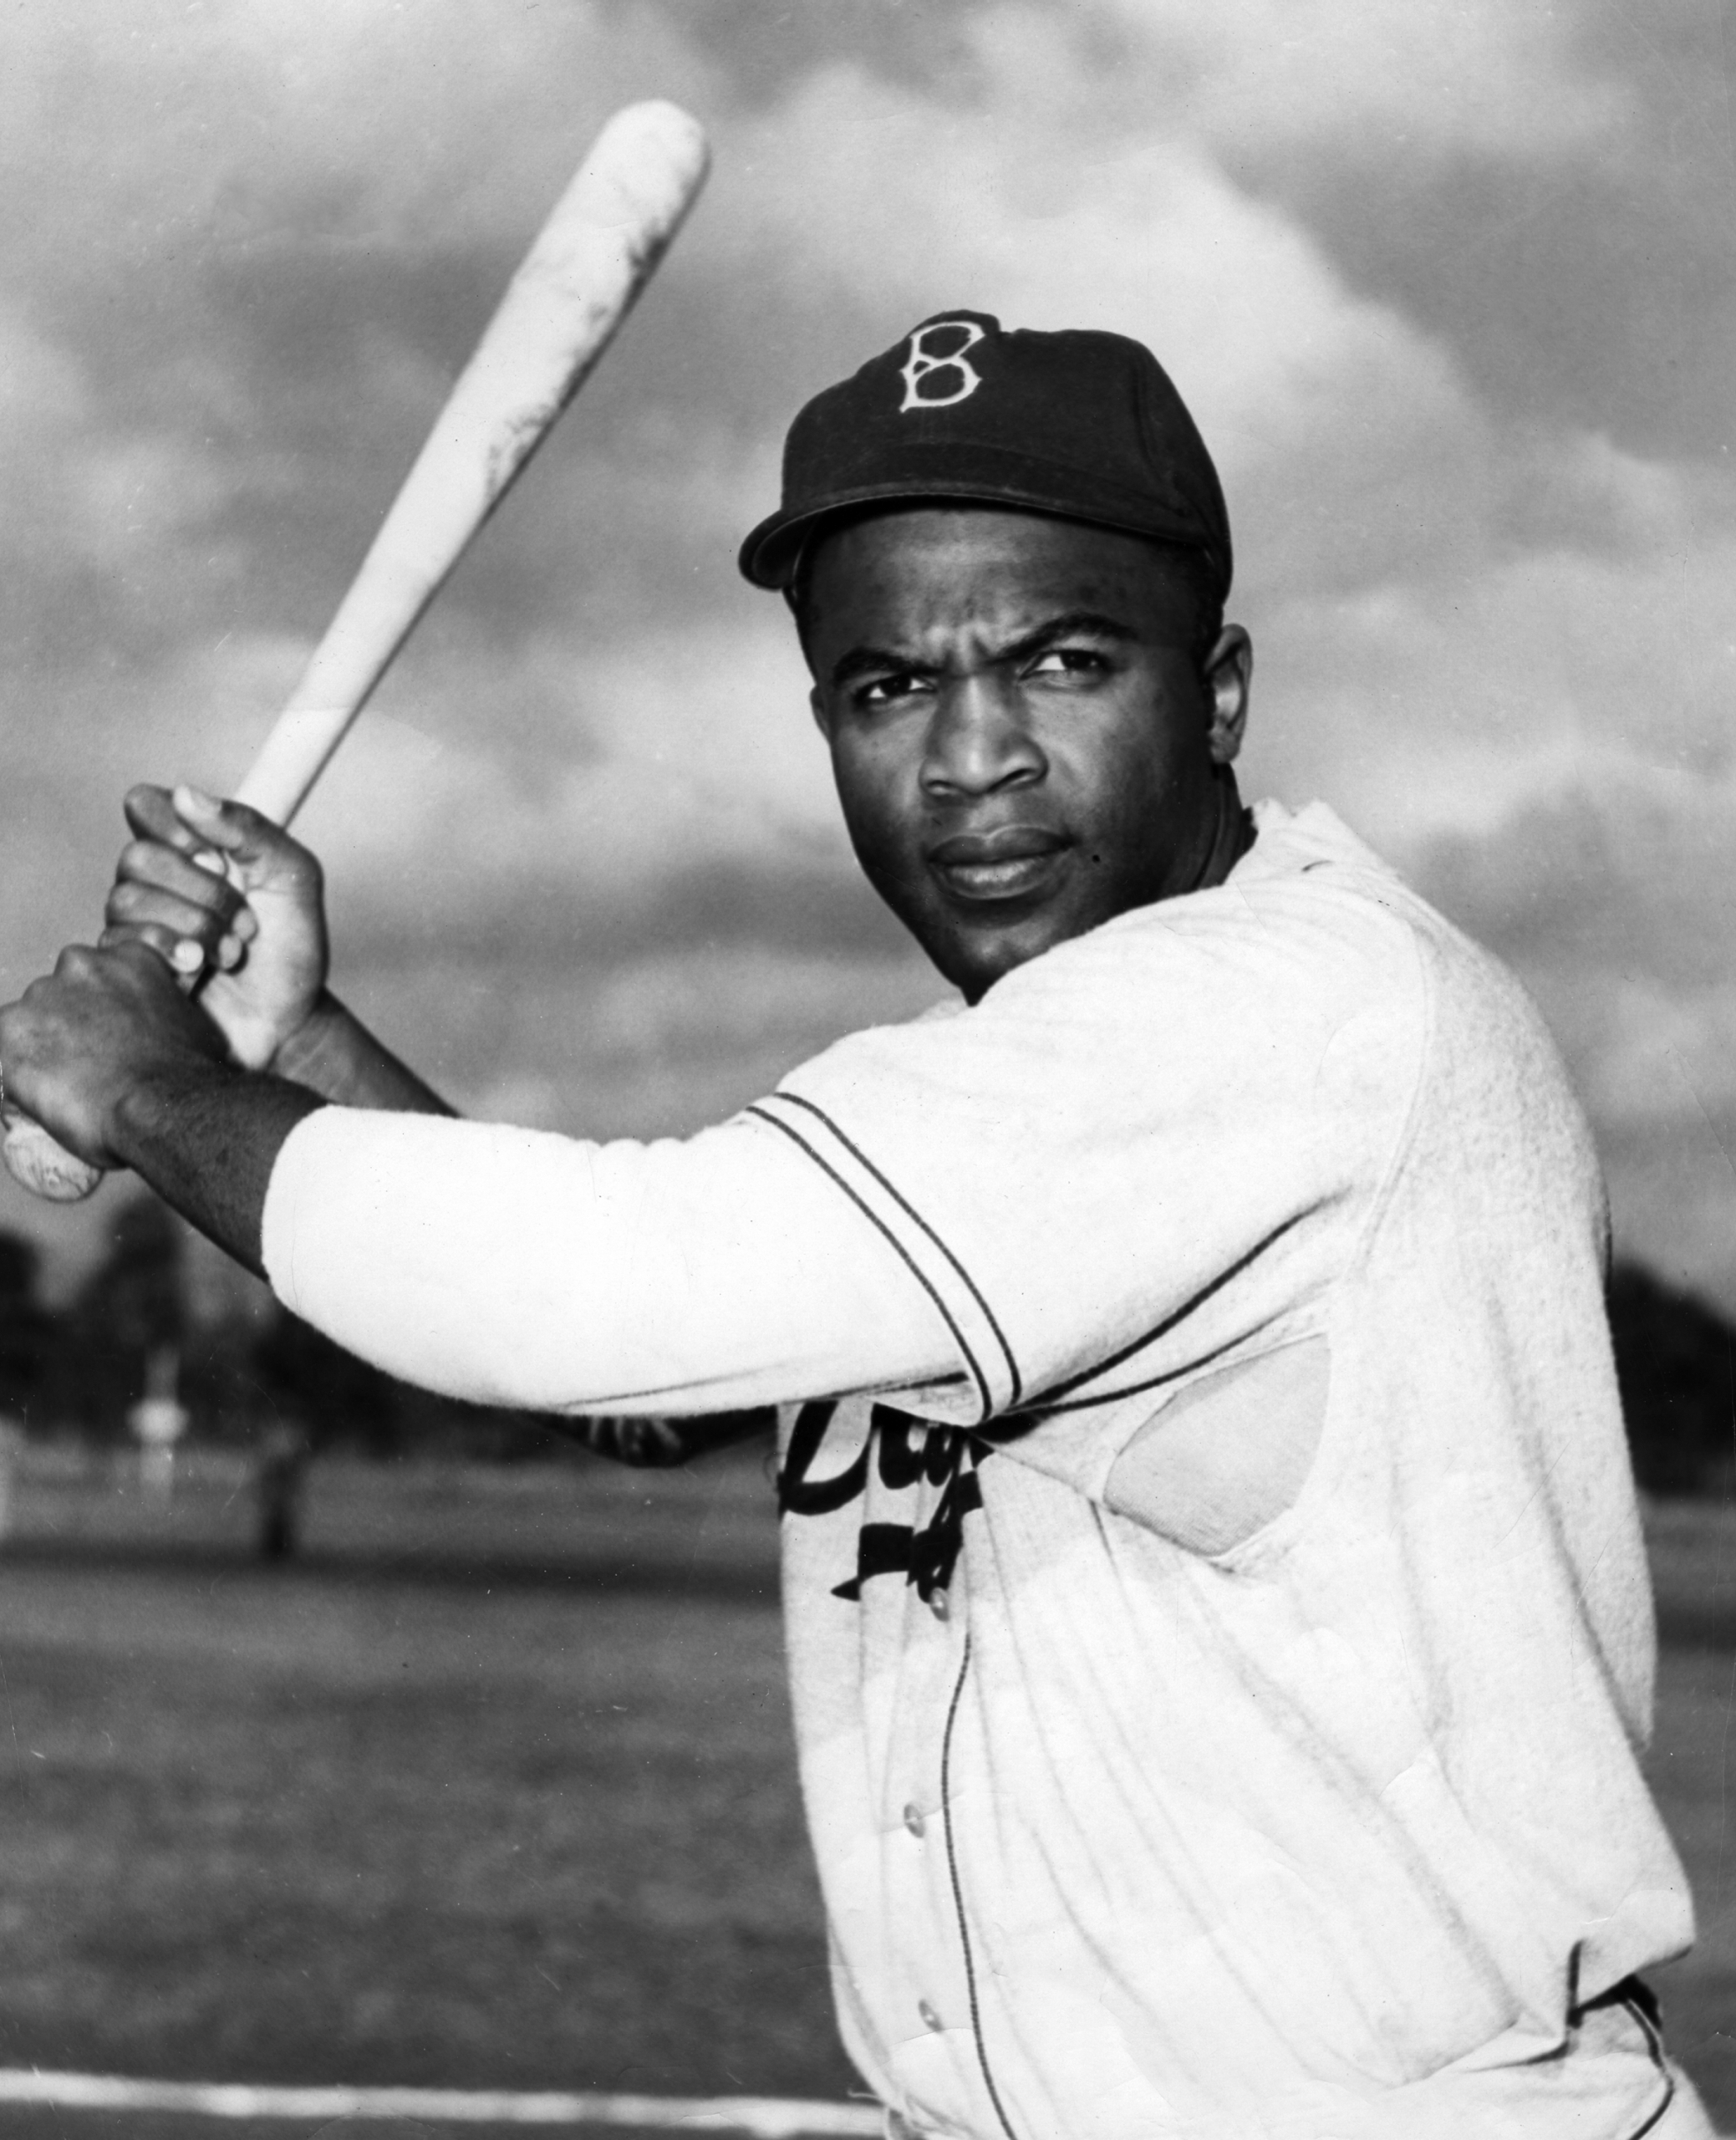 I. Introduction to Jackie Robinson and His Impact on MLB